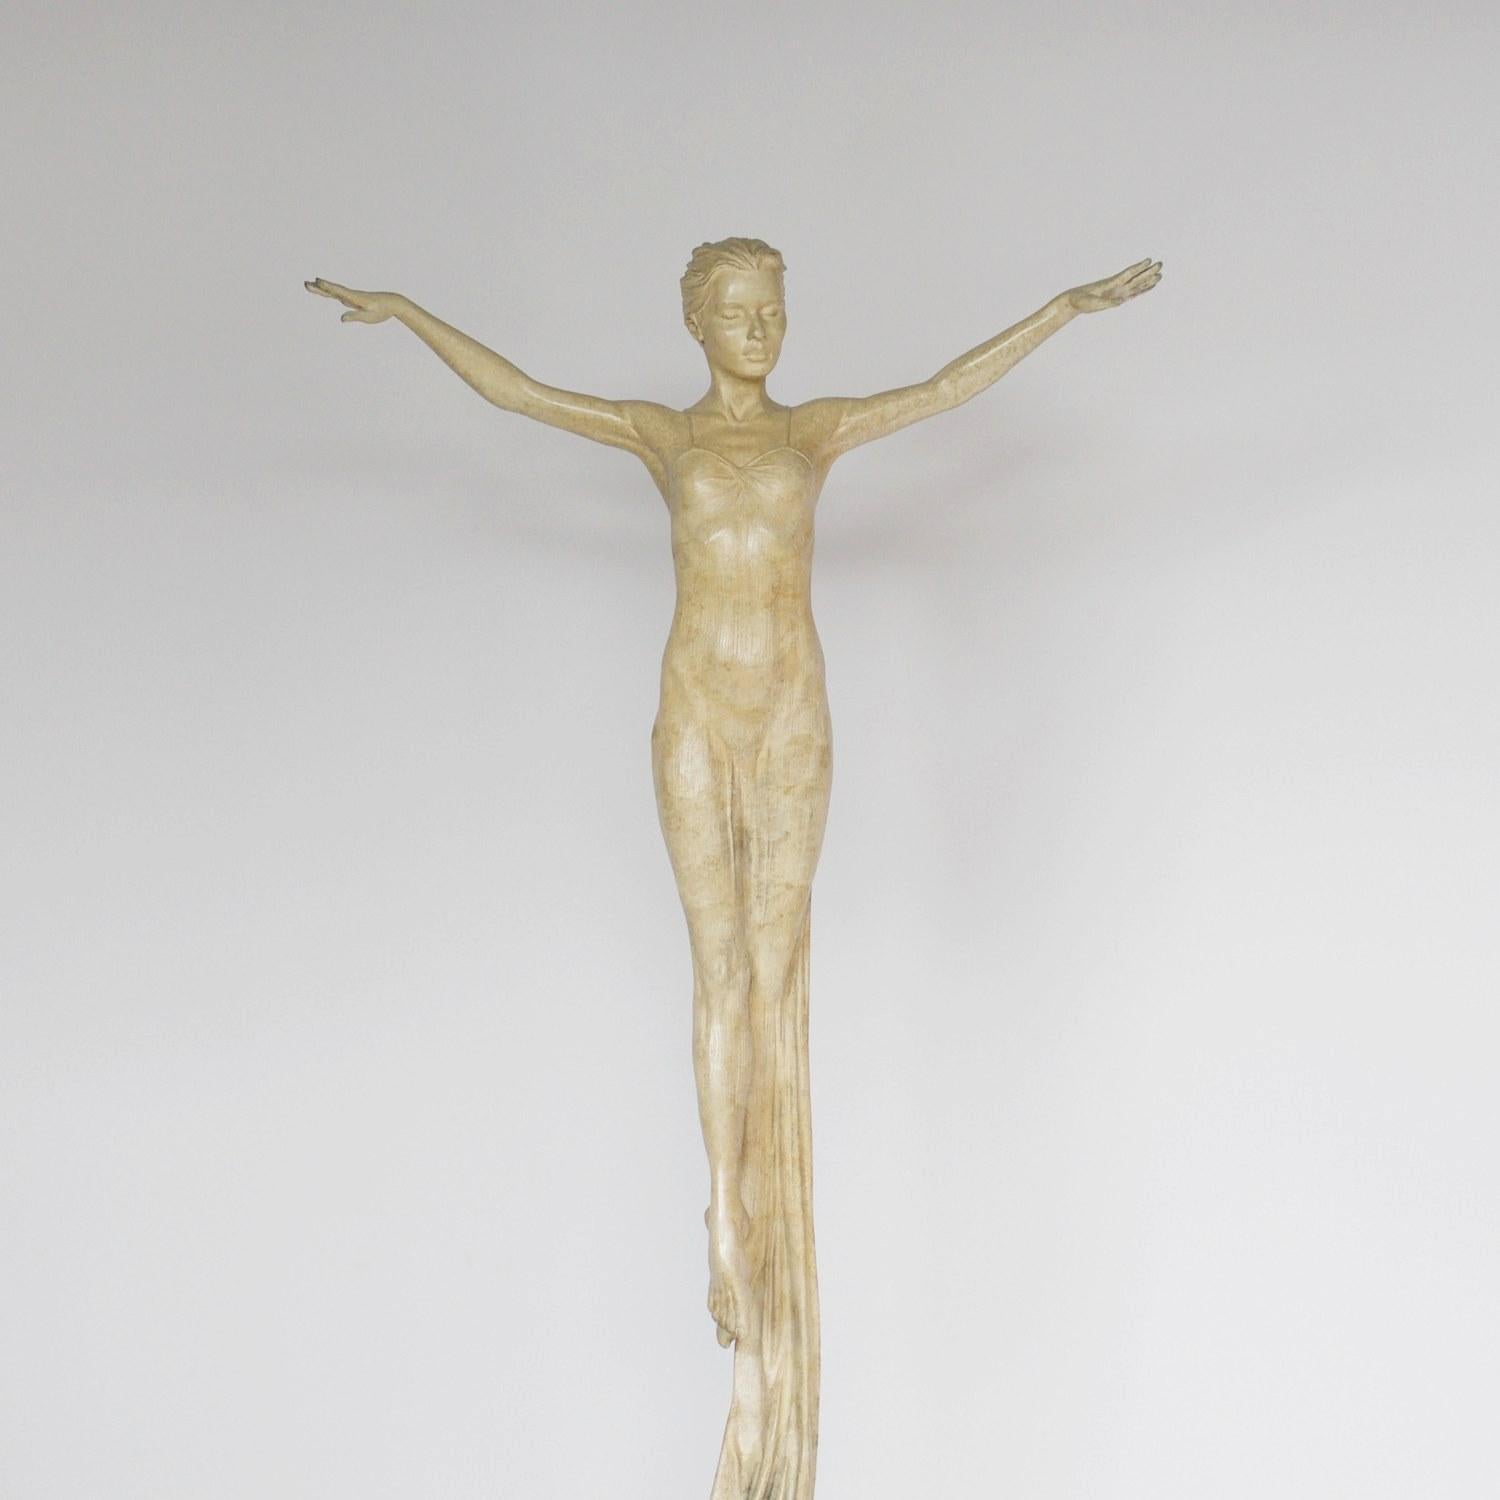 Juliet, a limited edition, patinated bronze figure of a dancer in draping robe. Set over a granite plinth. Signed 'Michael Talbot' to bronze, and stamped Royal Ballet 3/20.

After completing a Masters degree at the Royal Academy in London 1980,